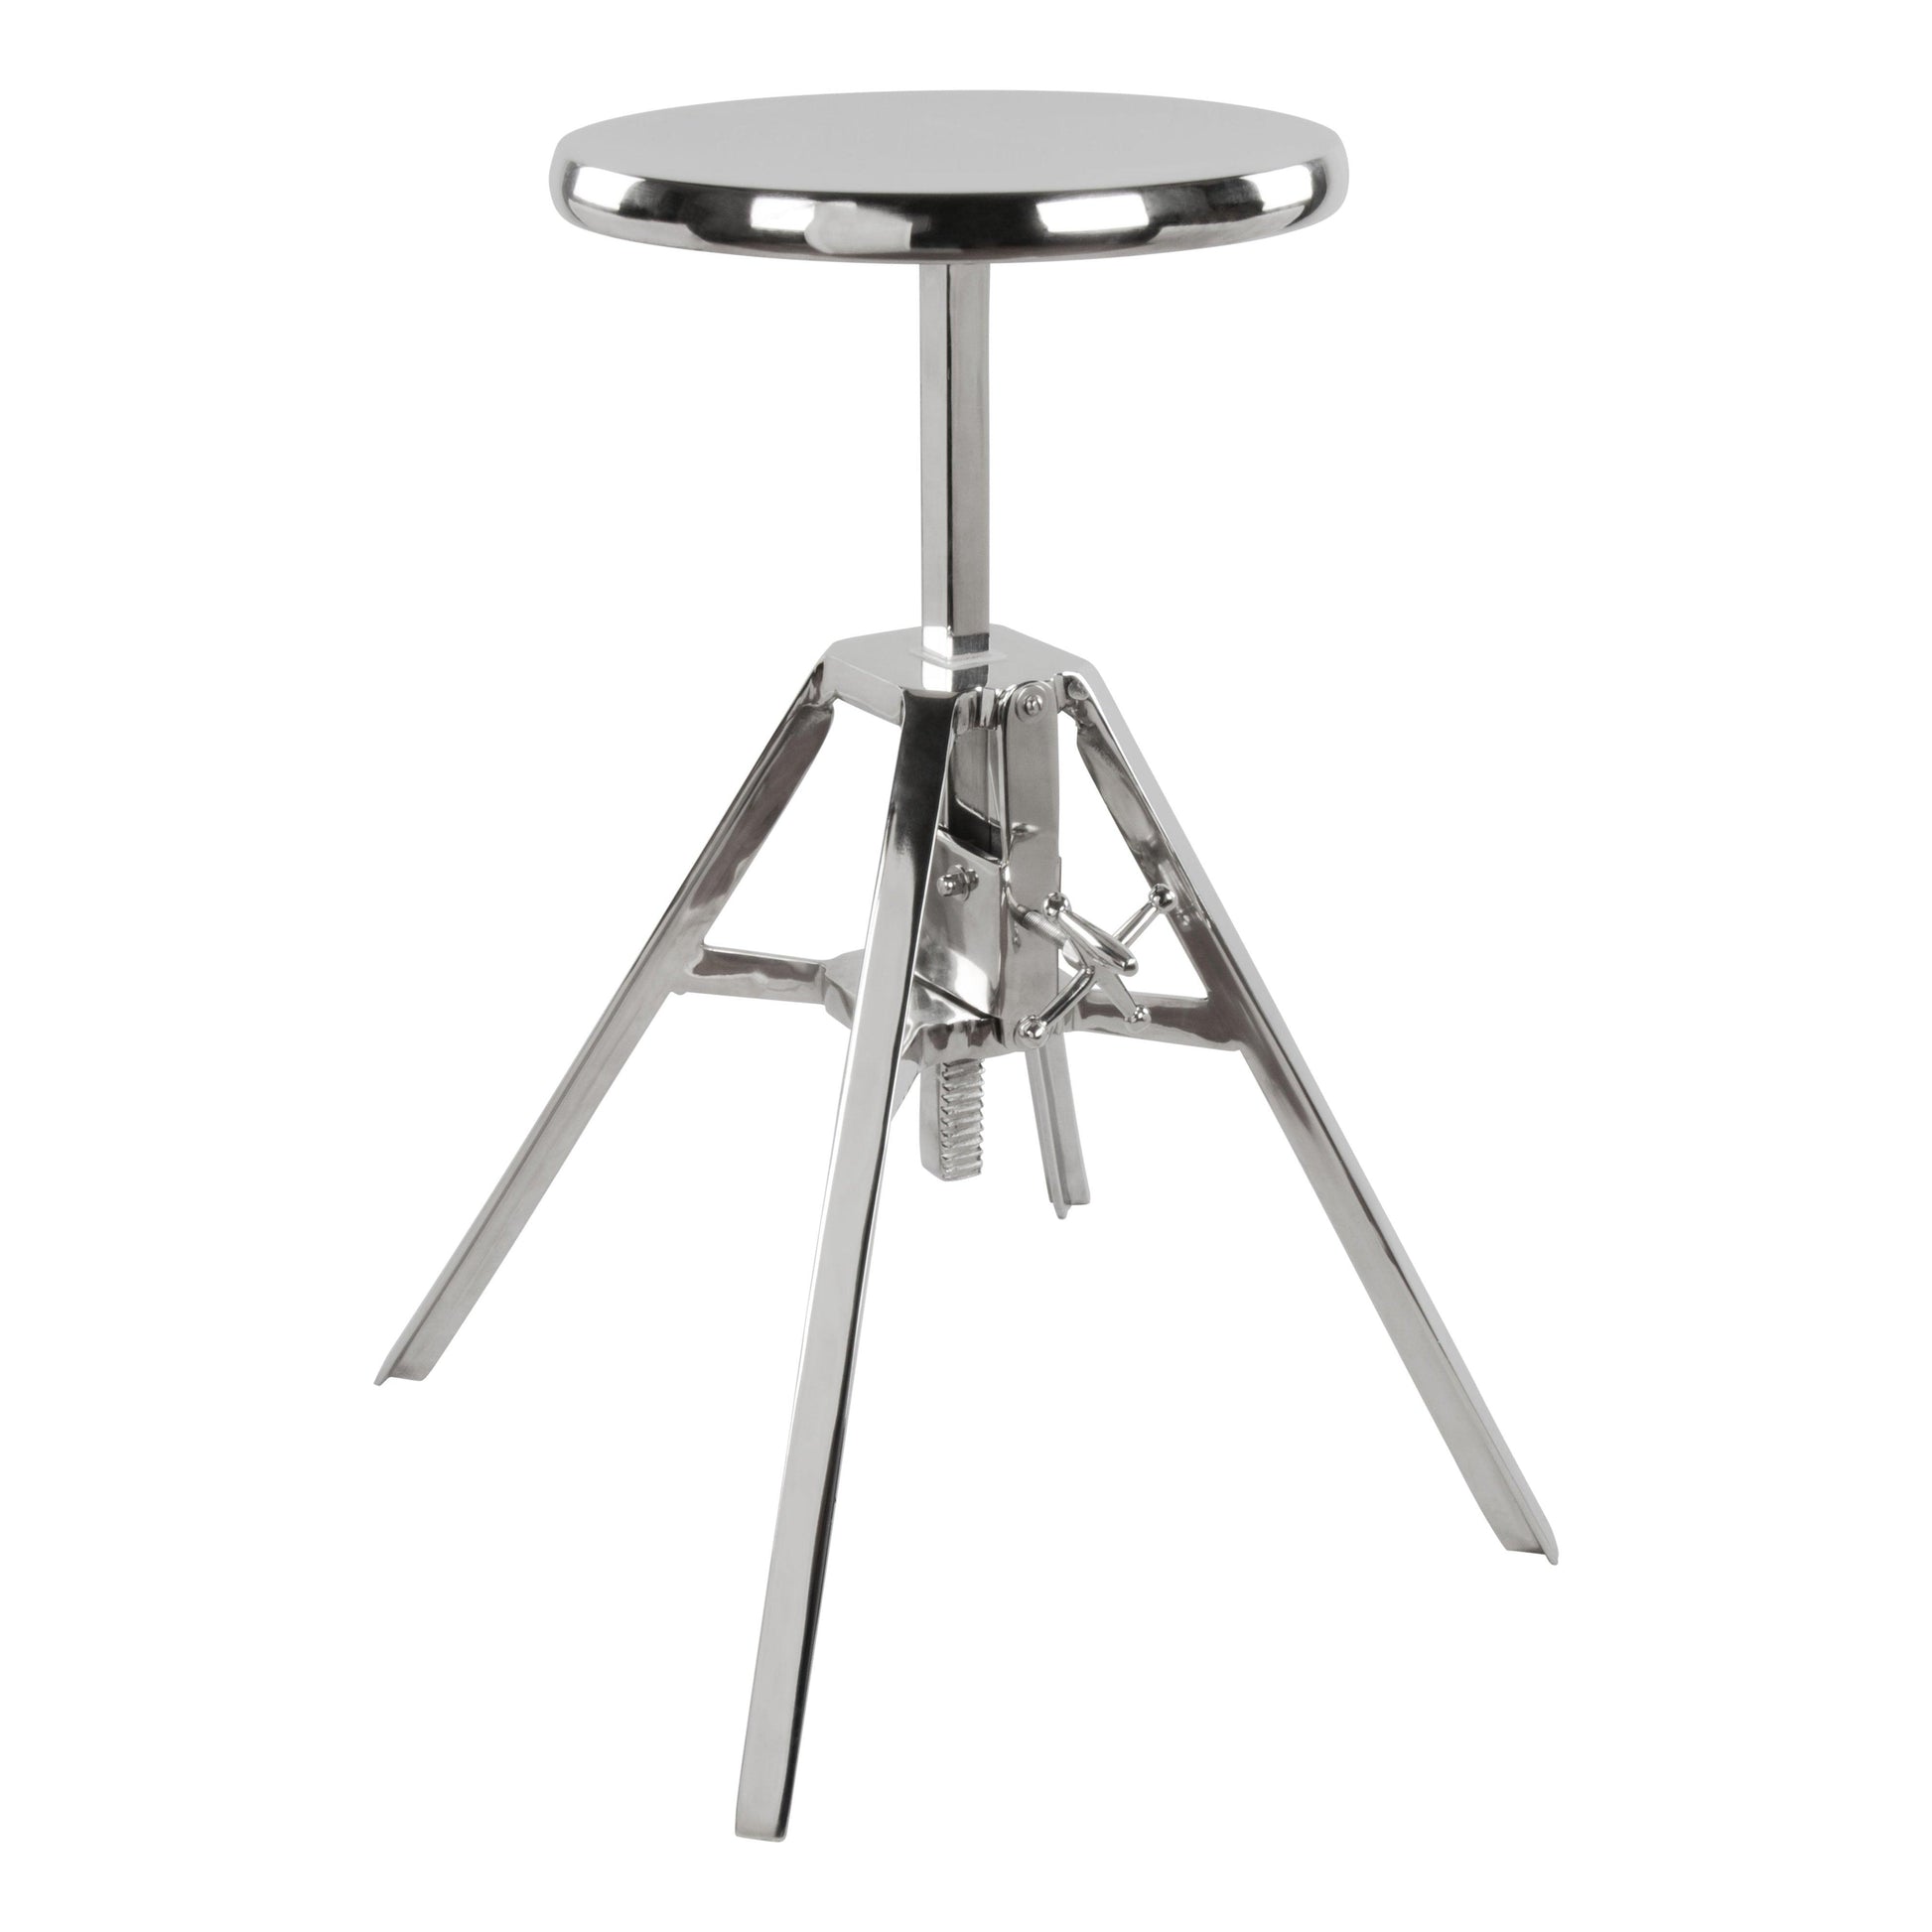 Mercy Stool Nickel - Sideboards and Things Brand_Zuo Modern, Color_Silver, Depth_10-20, Features_Adjustable Height, Finish_Antiqued, Height_20-30, Materials_Metal, Metal Type_Aluminum, Metal Type_Iron, Product Type_Stool, Width_10-20